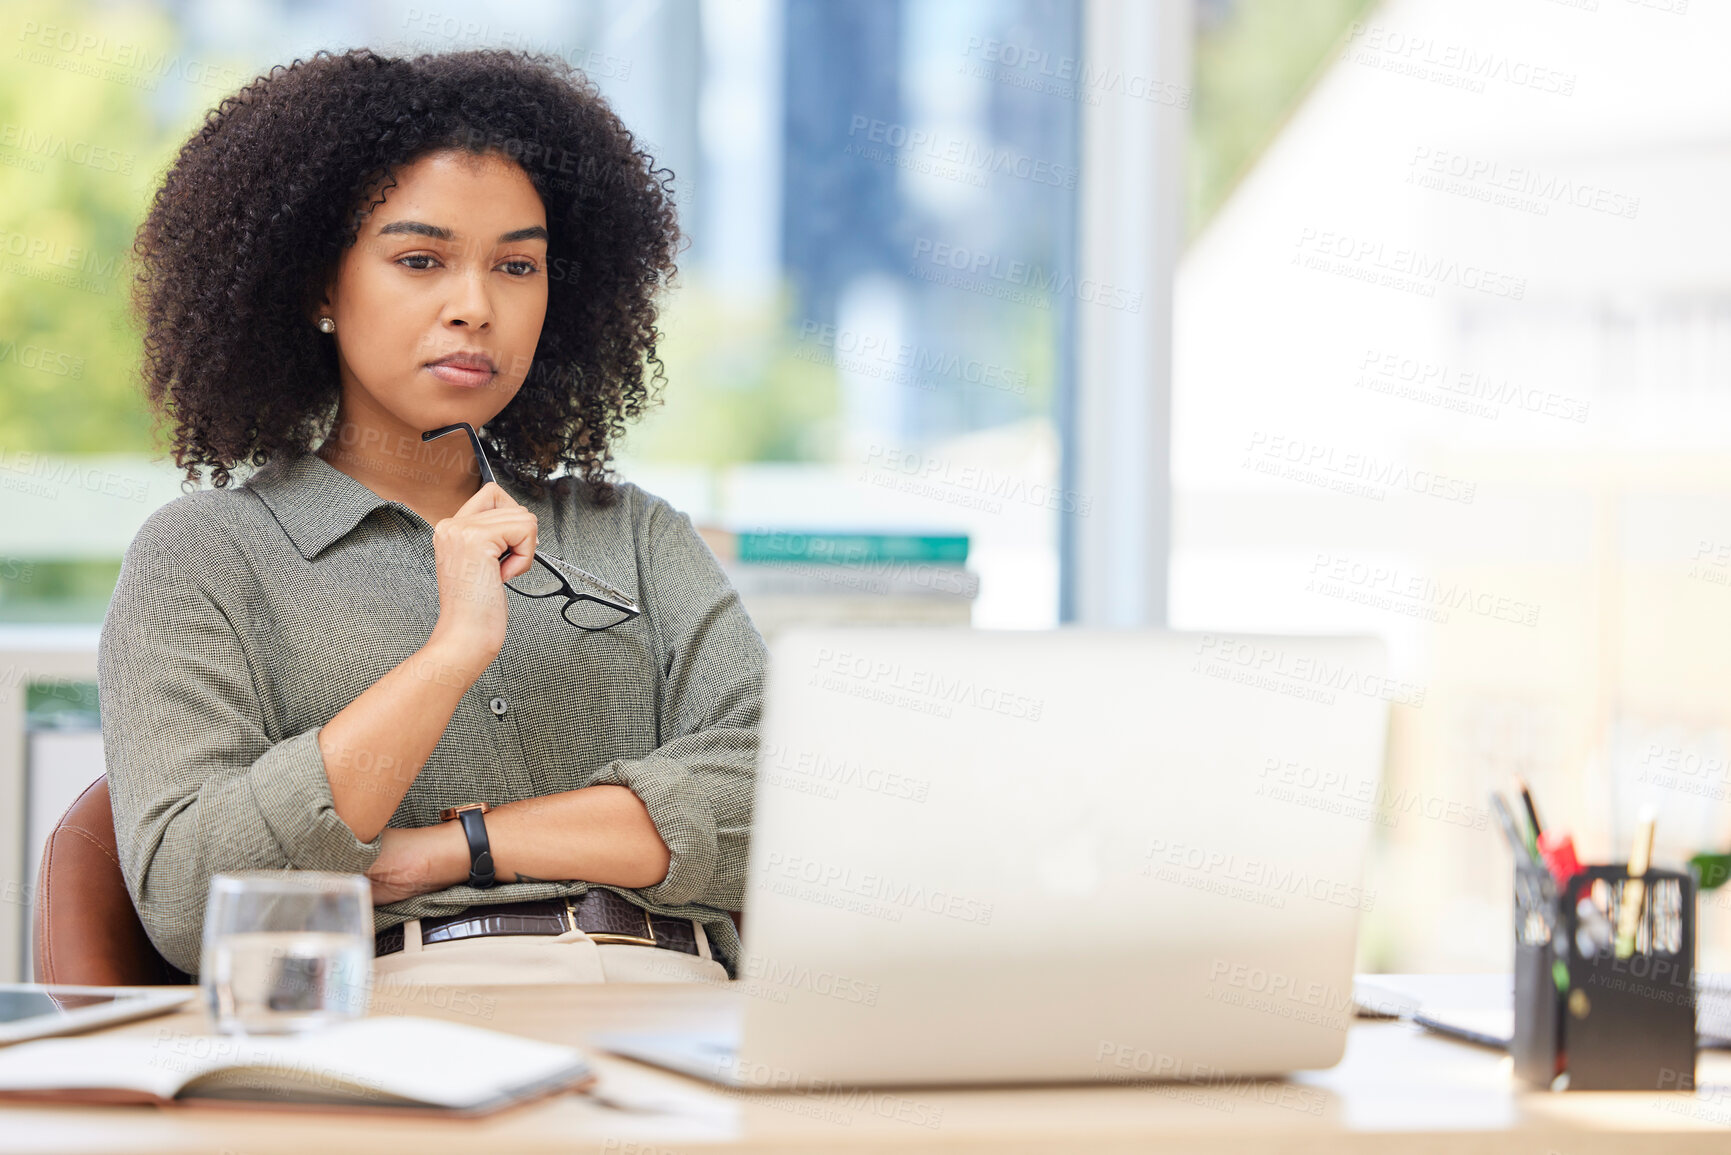 Buy stock photo Business laptop, thinking and black woman in office trying to solve problem. Idea, focus and female employee from South Africa with computer contemplating solution, pensive or lost in thoughts alone.